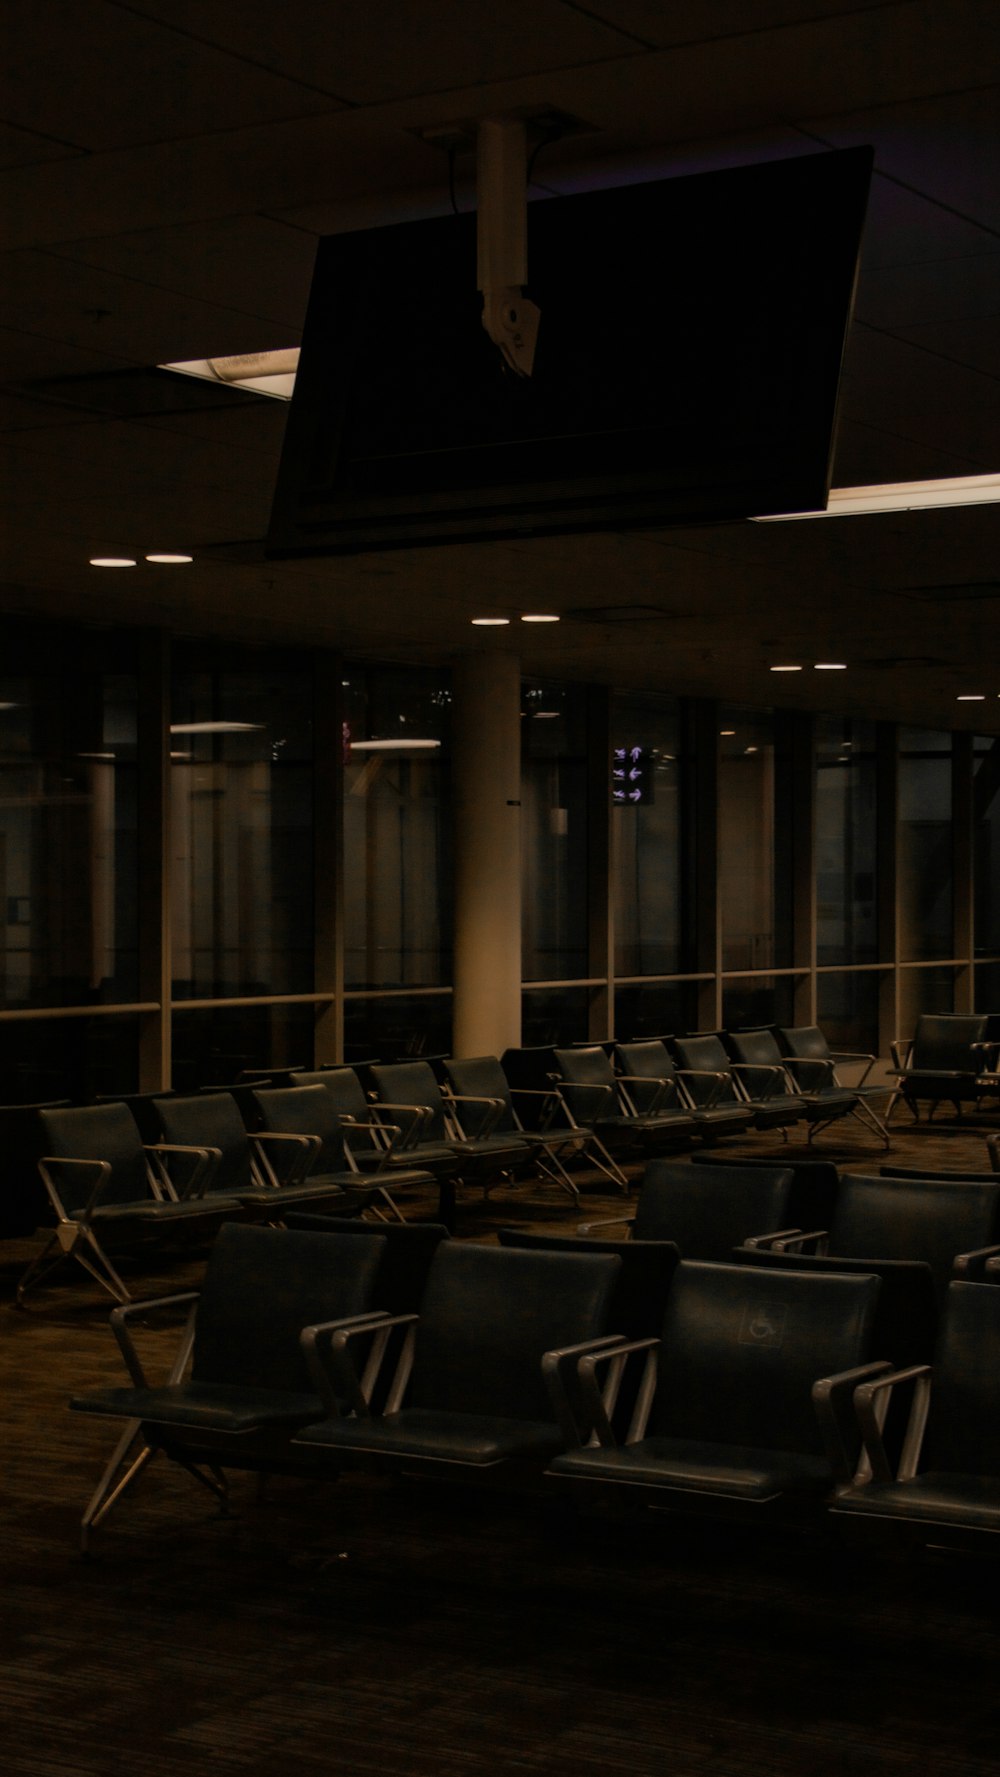 a row of empty chairs in an empty room